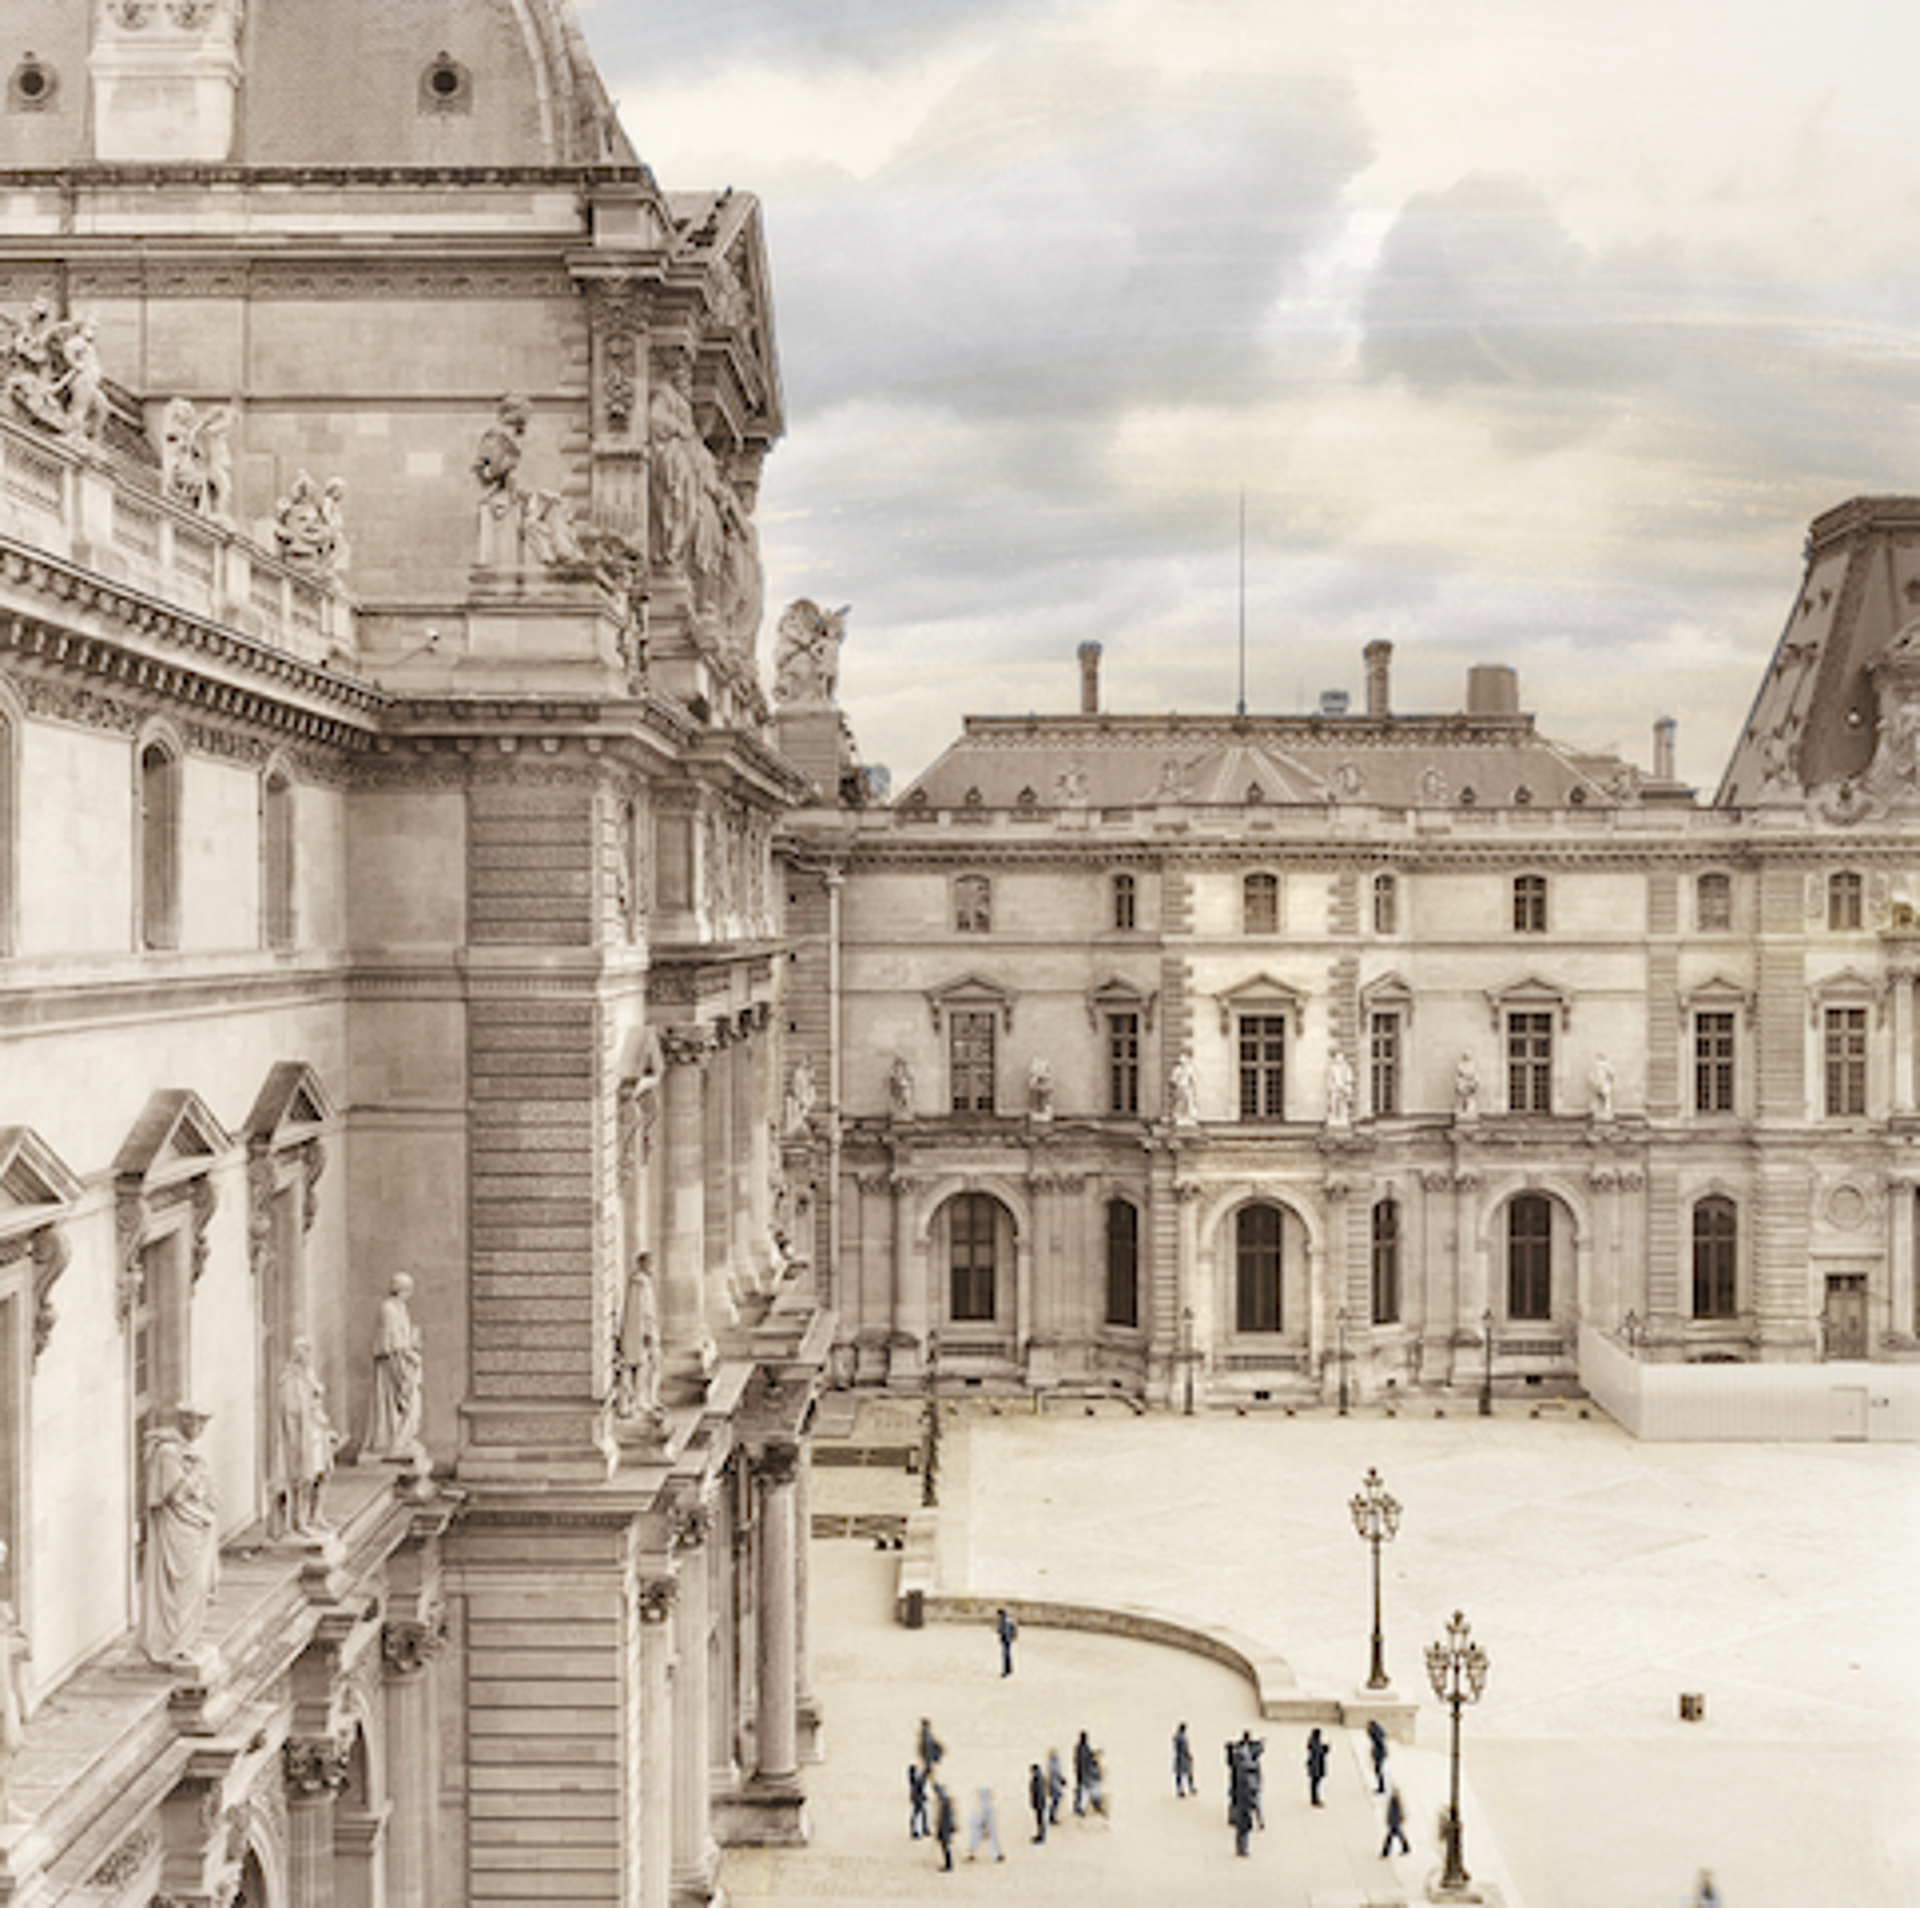 Courtyard at the Louvre by Andrew Sovjani